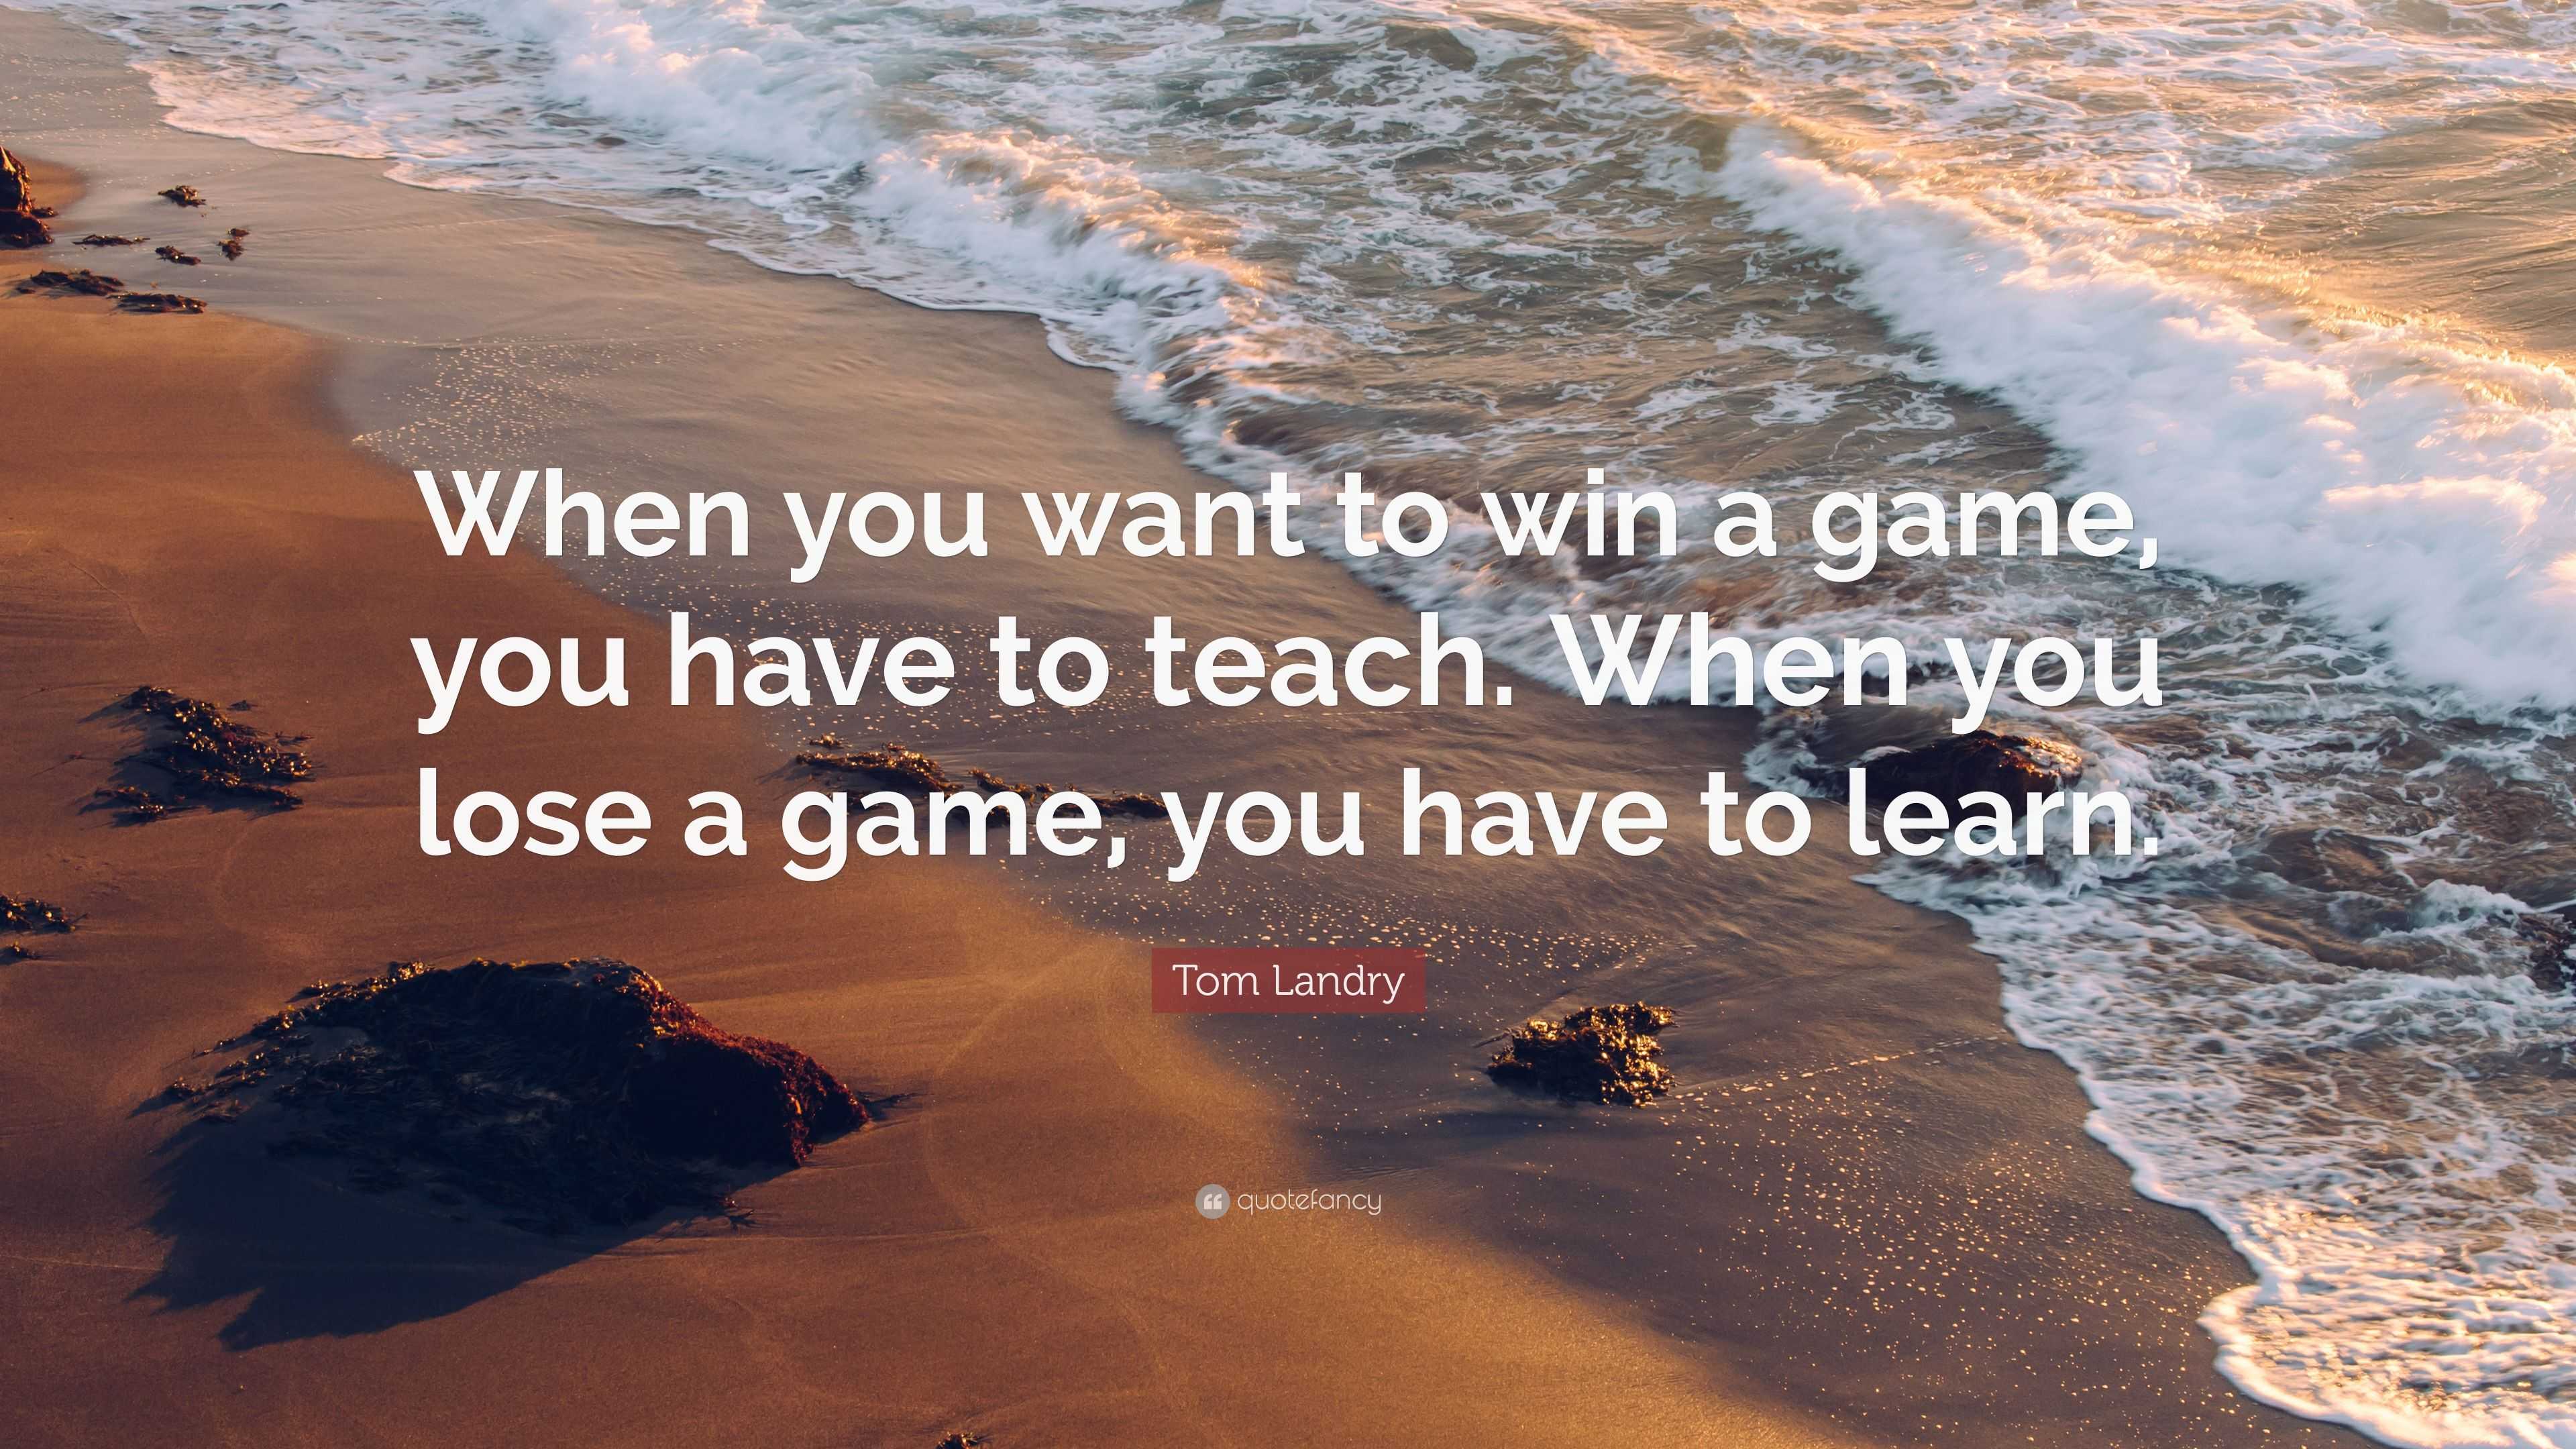 Inspiring Quotes - Be Positive on X: Life is a game. Play to win.  #TuesdayThoughts  / X